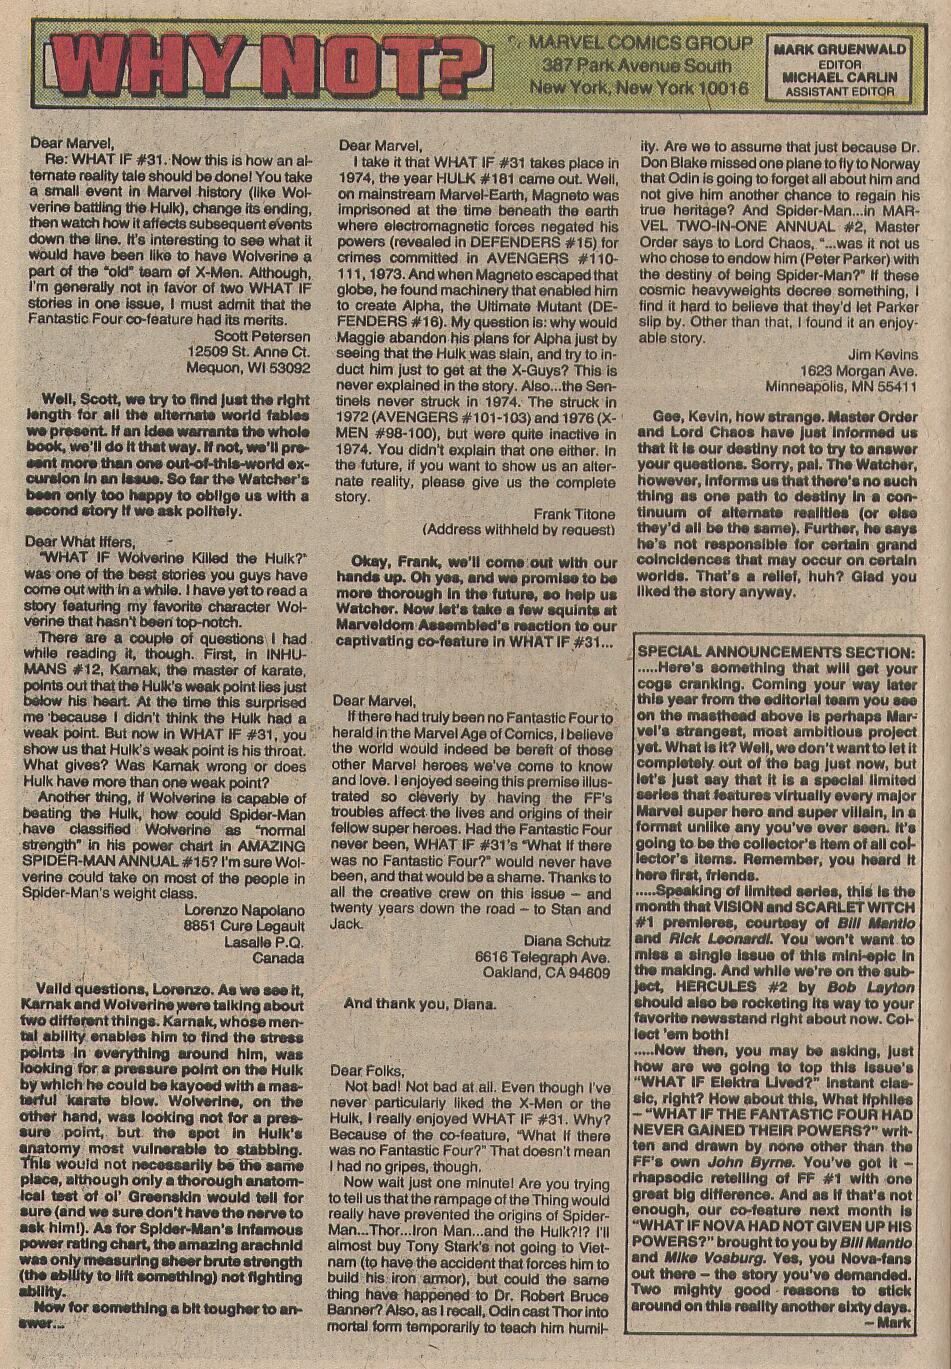 What If? (1977) issue 35 - Elektra had lived - Page 18